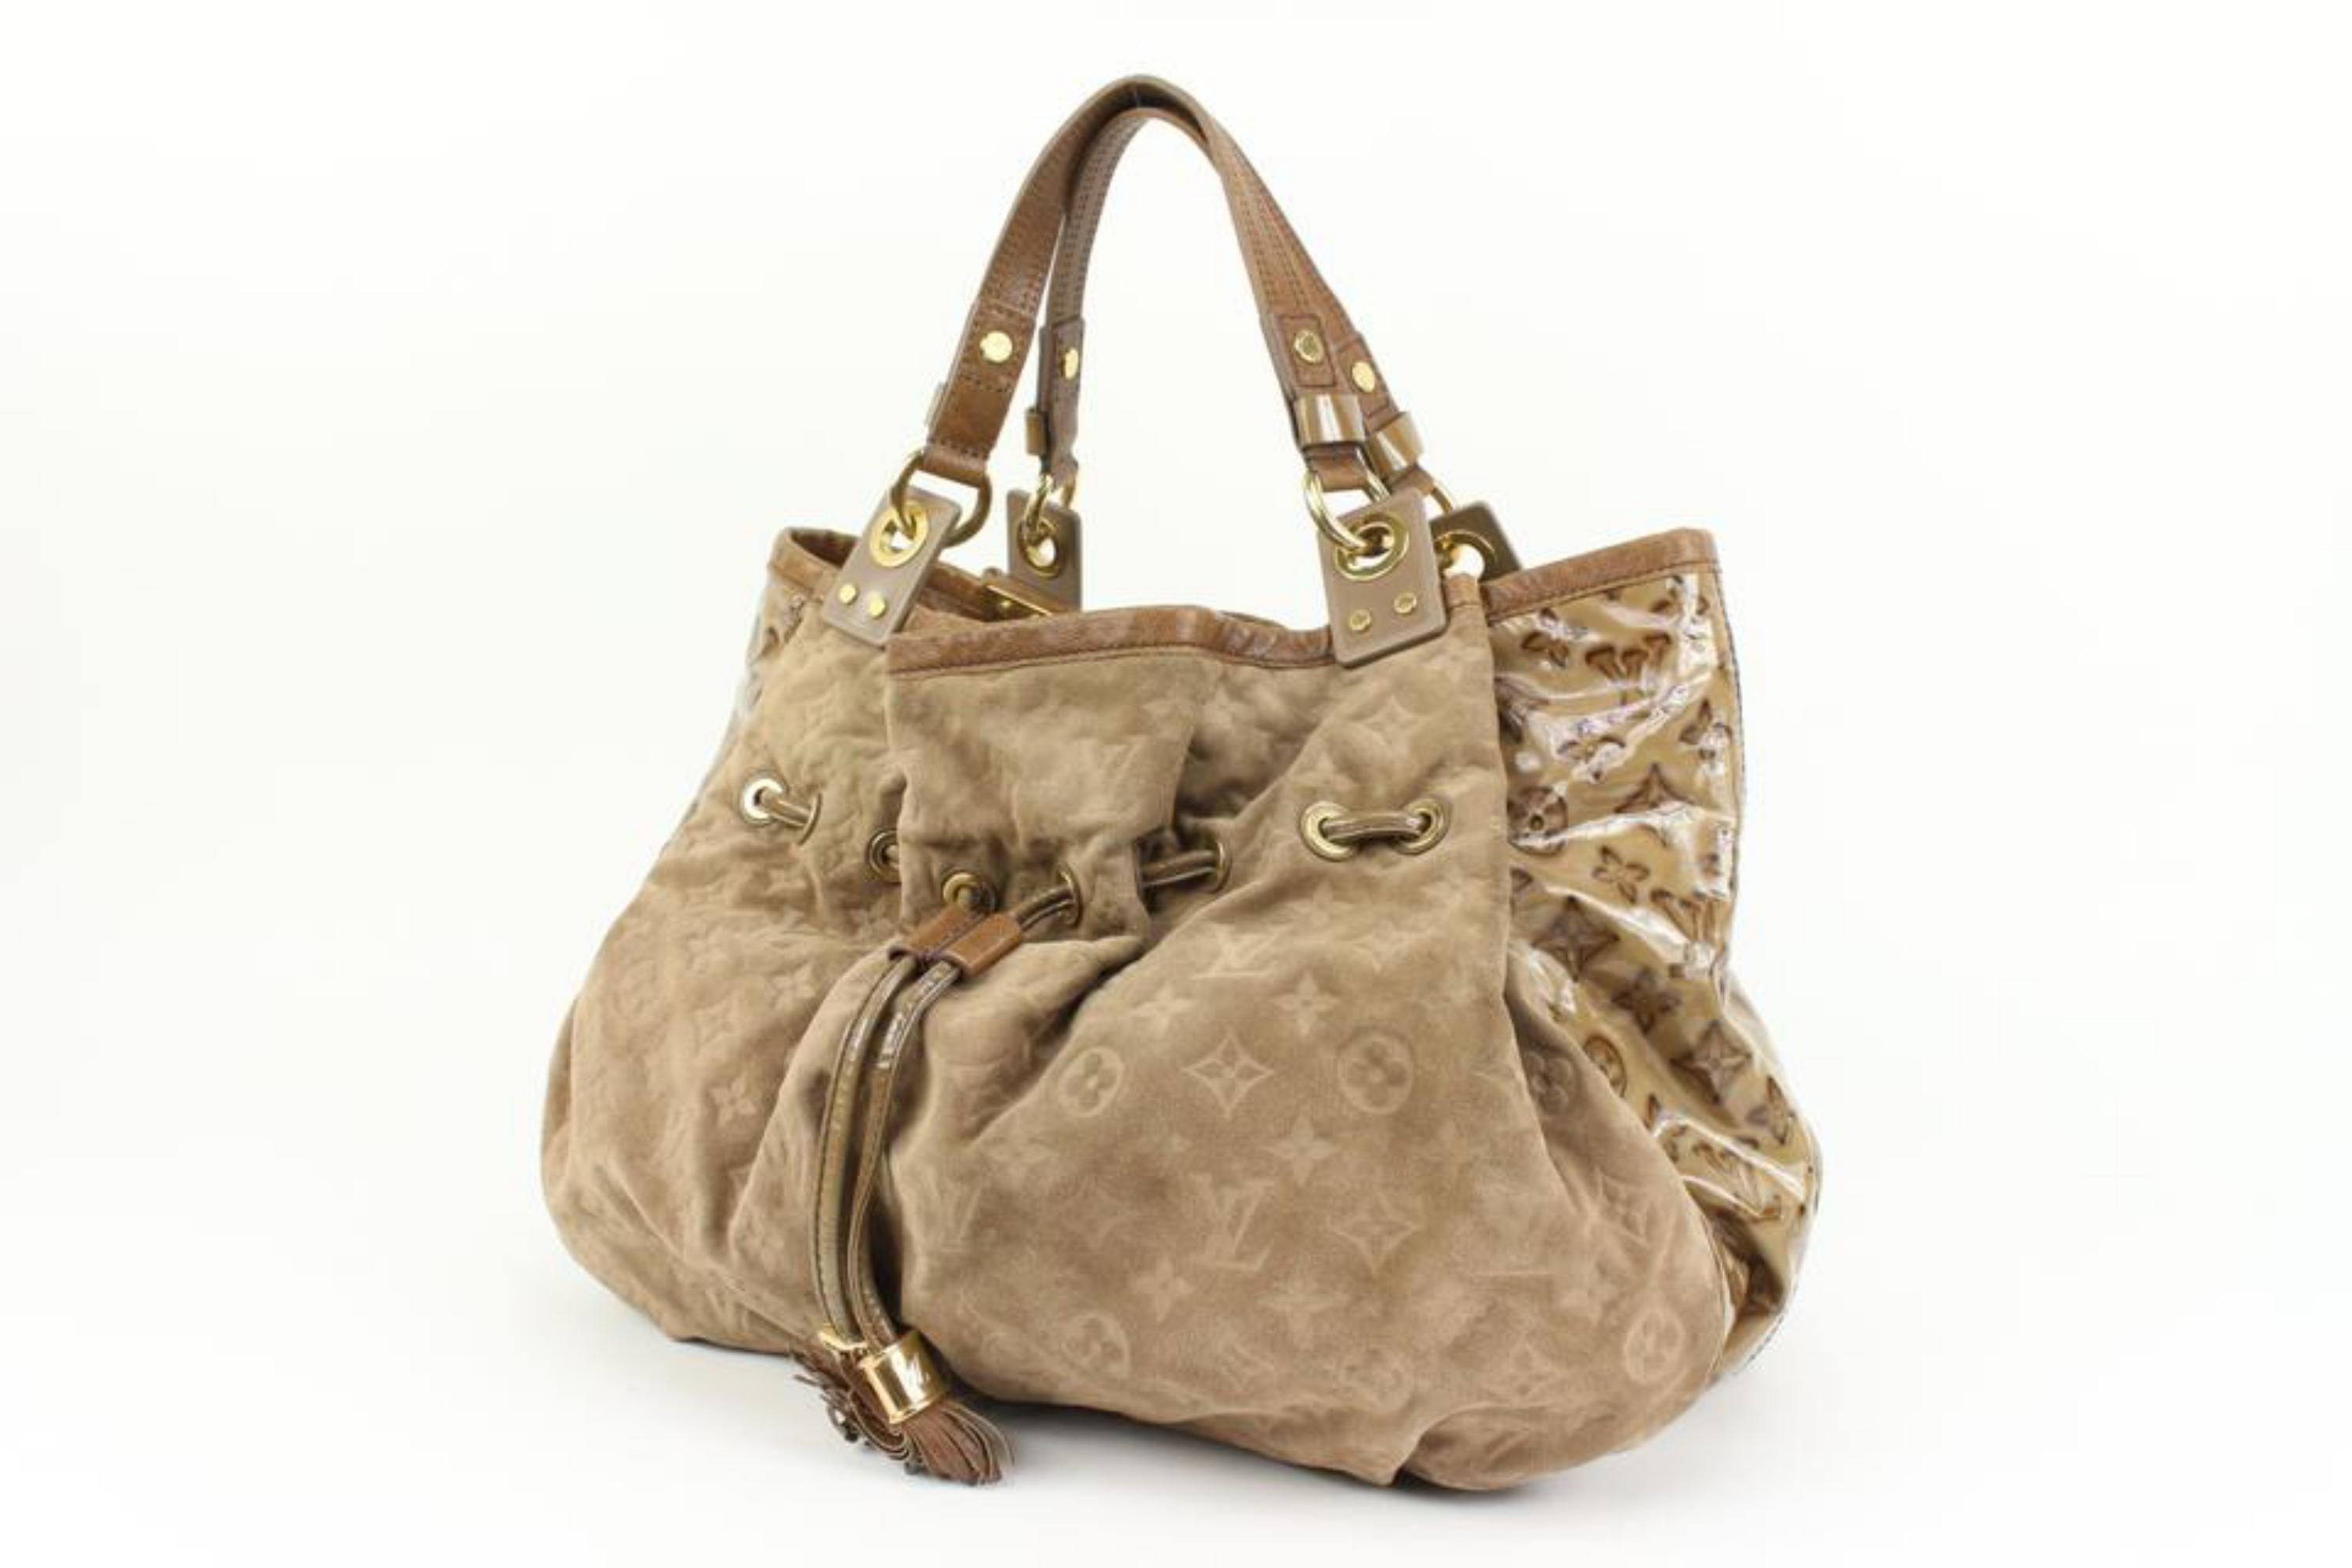 Louis Vuitton Brown Suede x Patent Irene Coco Hobo Bag 67lk322s
Date Code/Serial Number: AR1079
Made In: France
Measurements: Length:  17.5